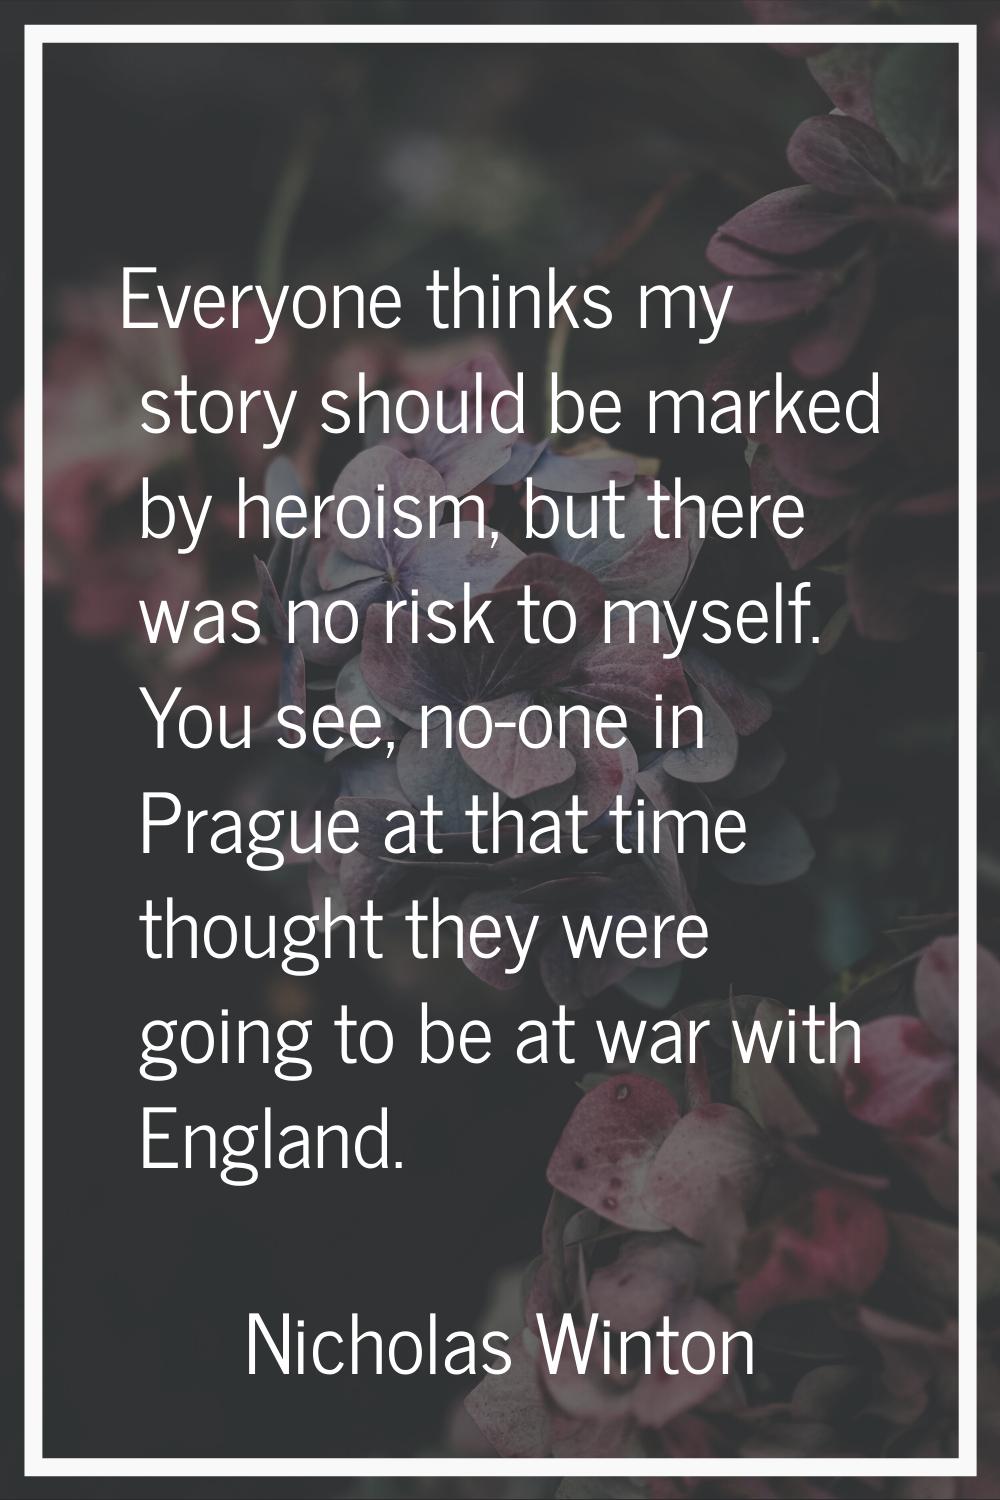 Everyone thinks my story should be marked by heroism, but there was no risk to myself. You see, no-